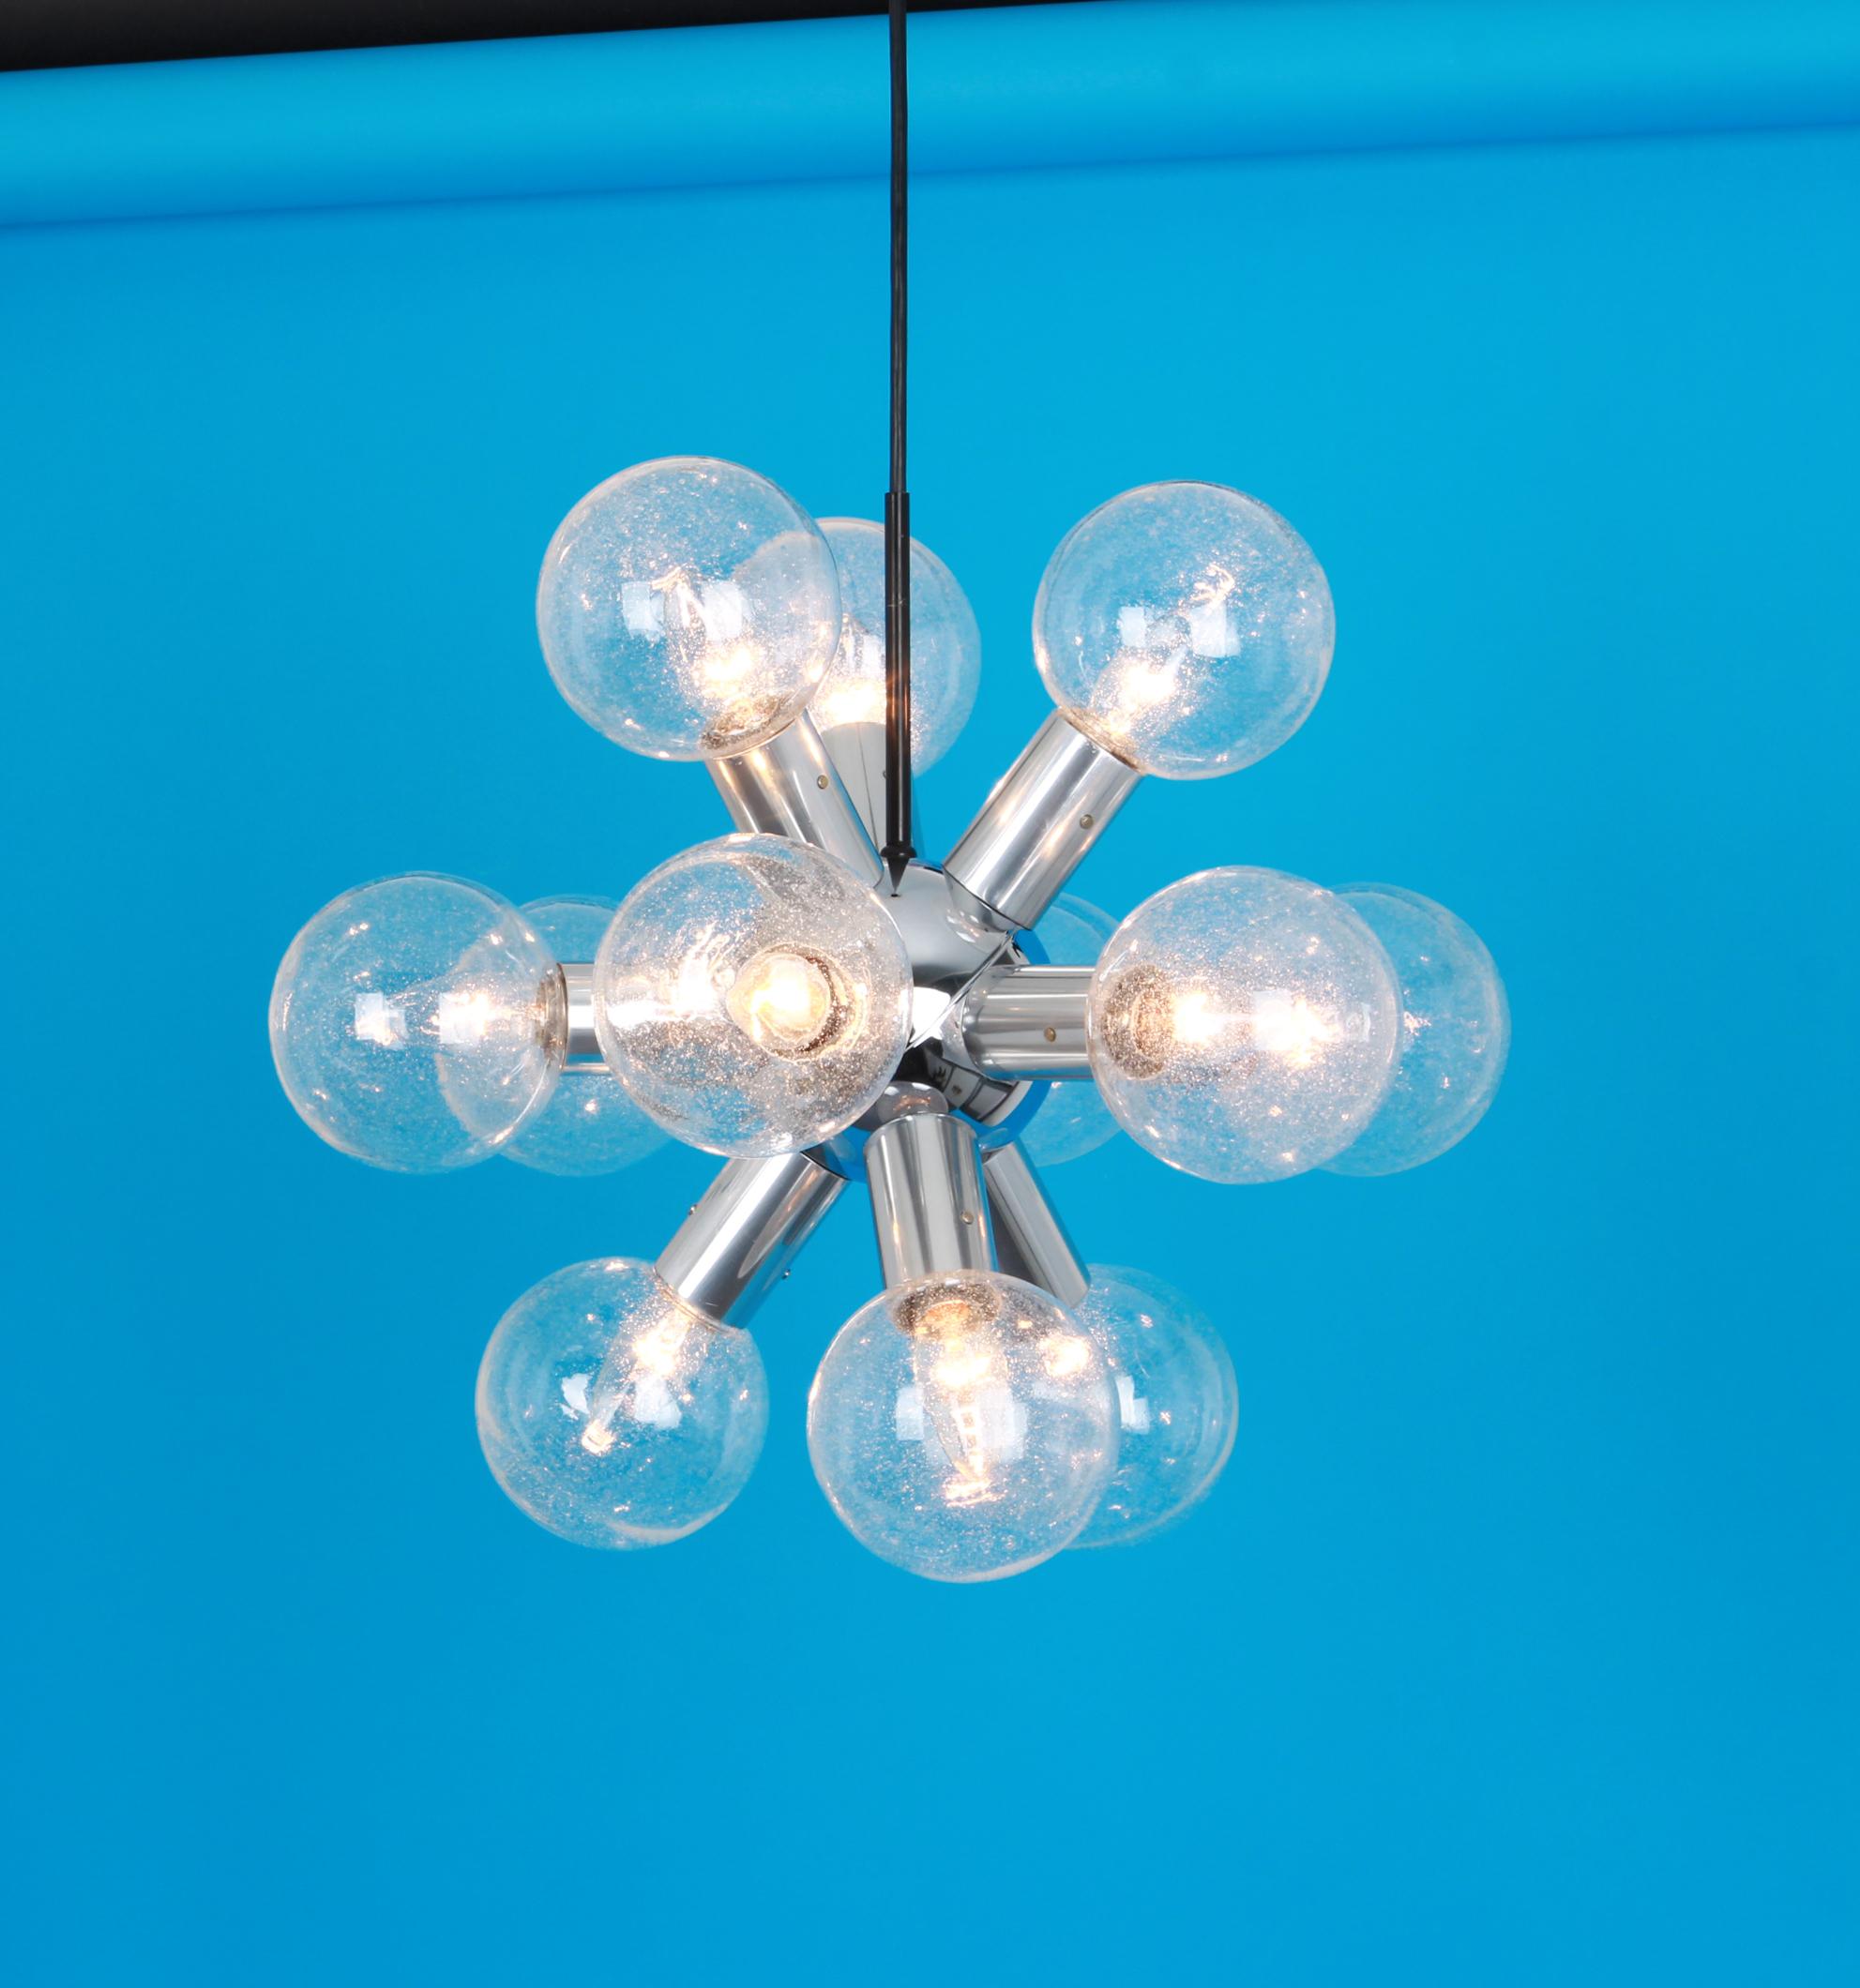 Exclusive Polished aluminum with 12 bubble glasses (mouth-blown)
Stunning Sputnik pendant lamp designed by Kalmar Leuchten during the 1970s.

Sockets: It needs 12x E14 small bulbs.
Light bulbs are not included. It is possible to install this fixture